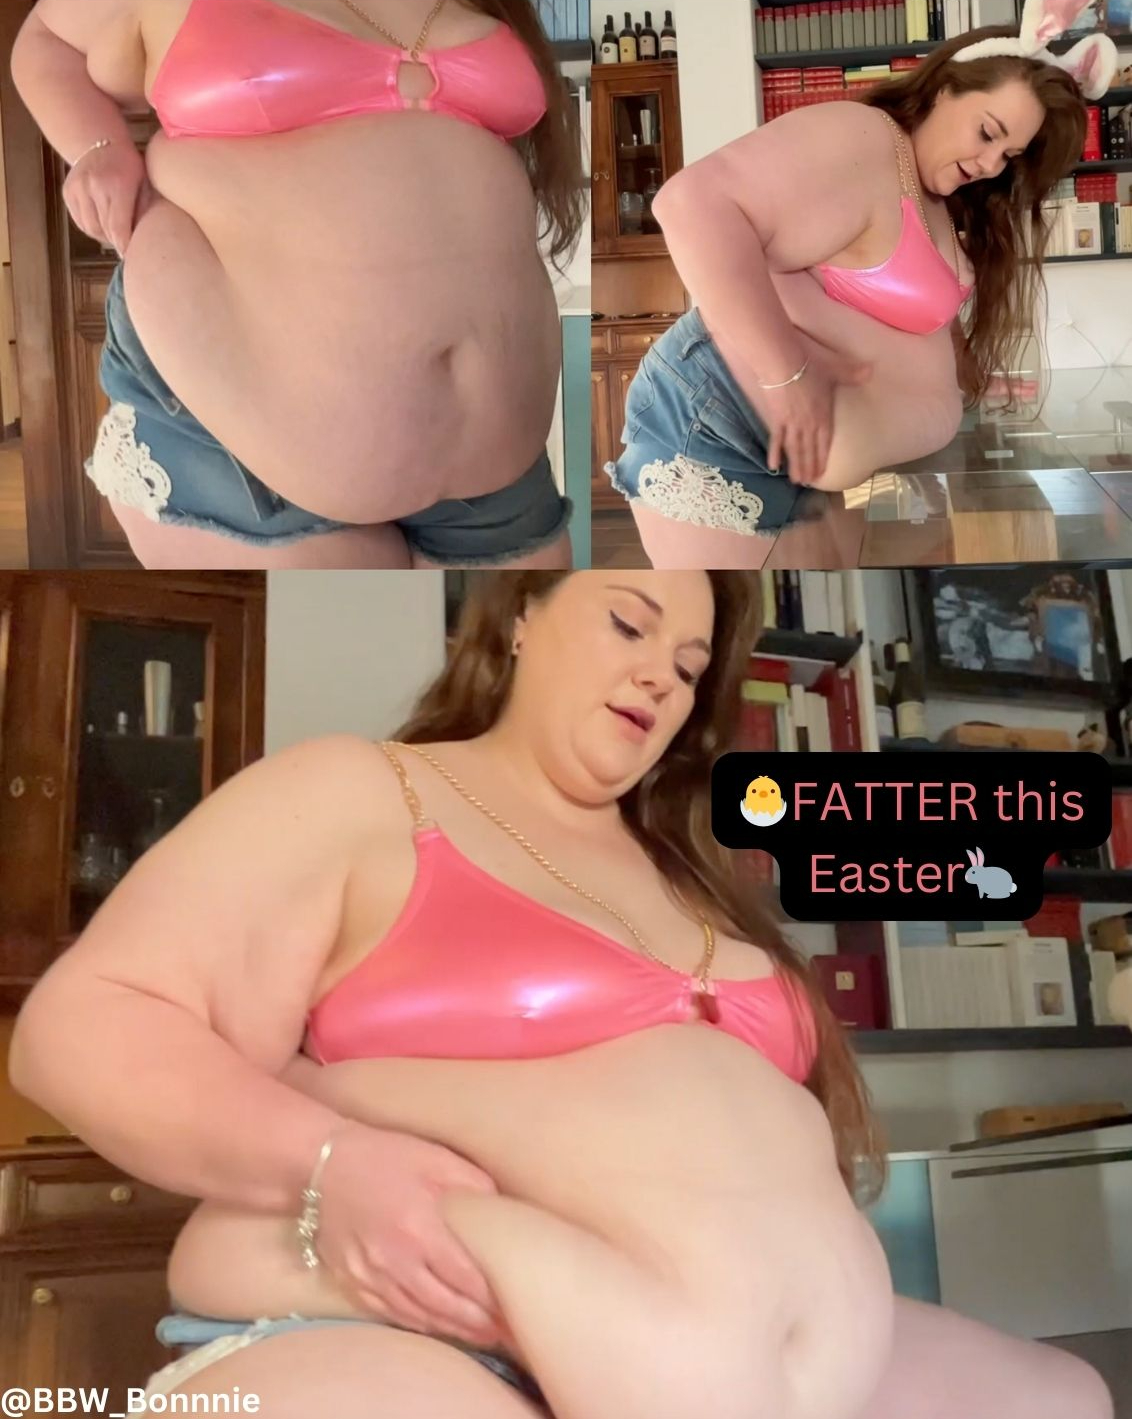 Fatter bunny this Easter.jpg